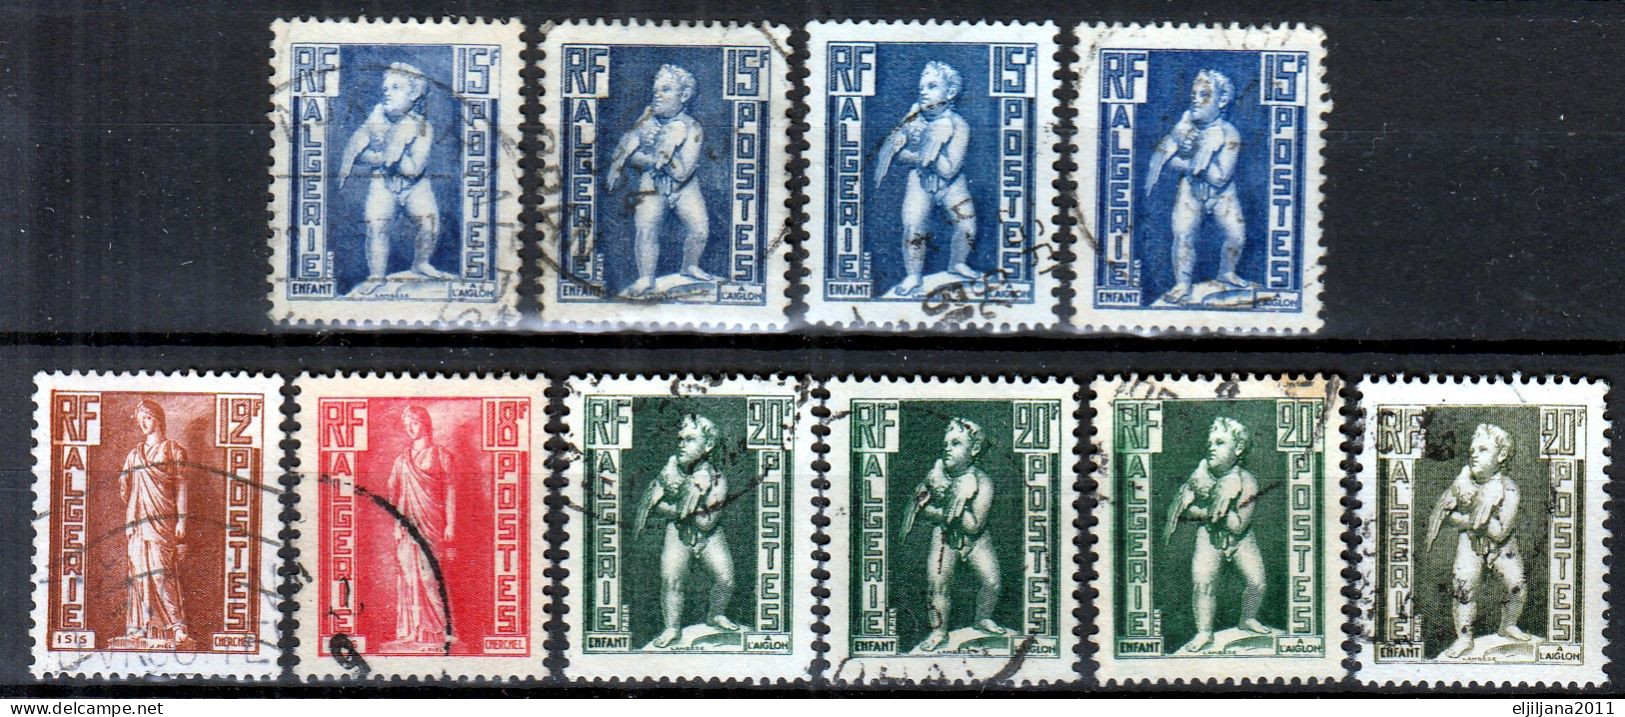 Action !! SALE !! 50 % OFF !! ⁕ France 1952 Algeria ⁕ ALGERIE Postes, Isis, Child With Eagle ⁕ 21v Used - Used Stamps